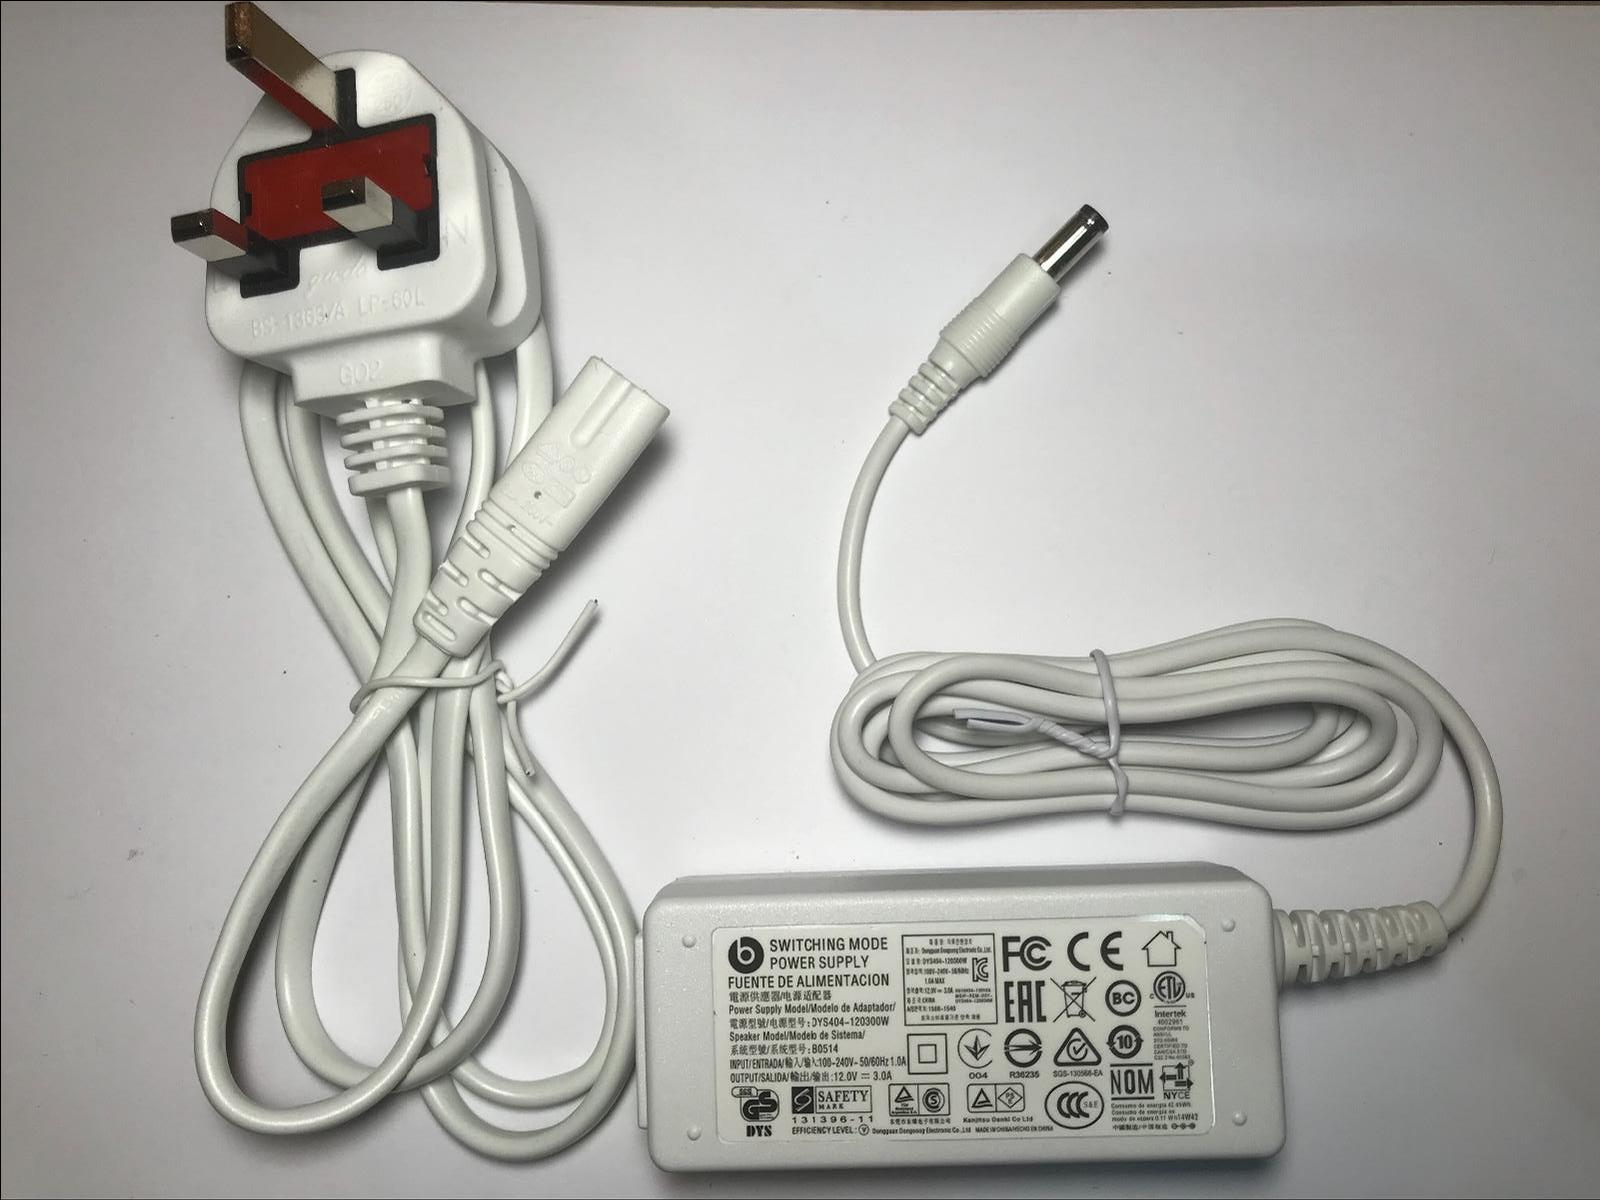 12.0V 3000mA AC-DC Adaptor for Flypower switching adapter model:ps361bcak3000b Type: Desktop Max. Output Power: 36W Out